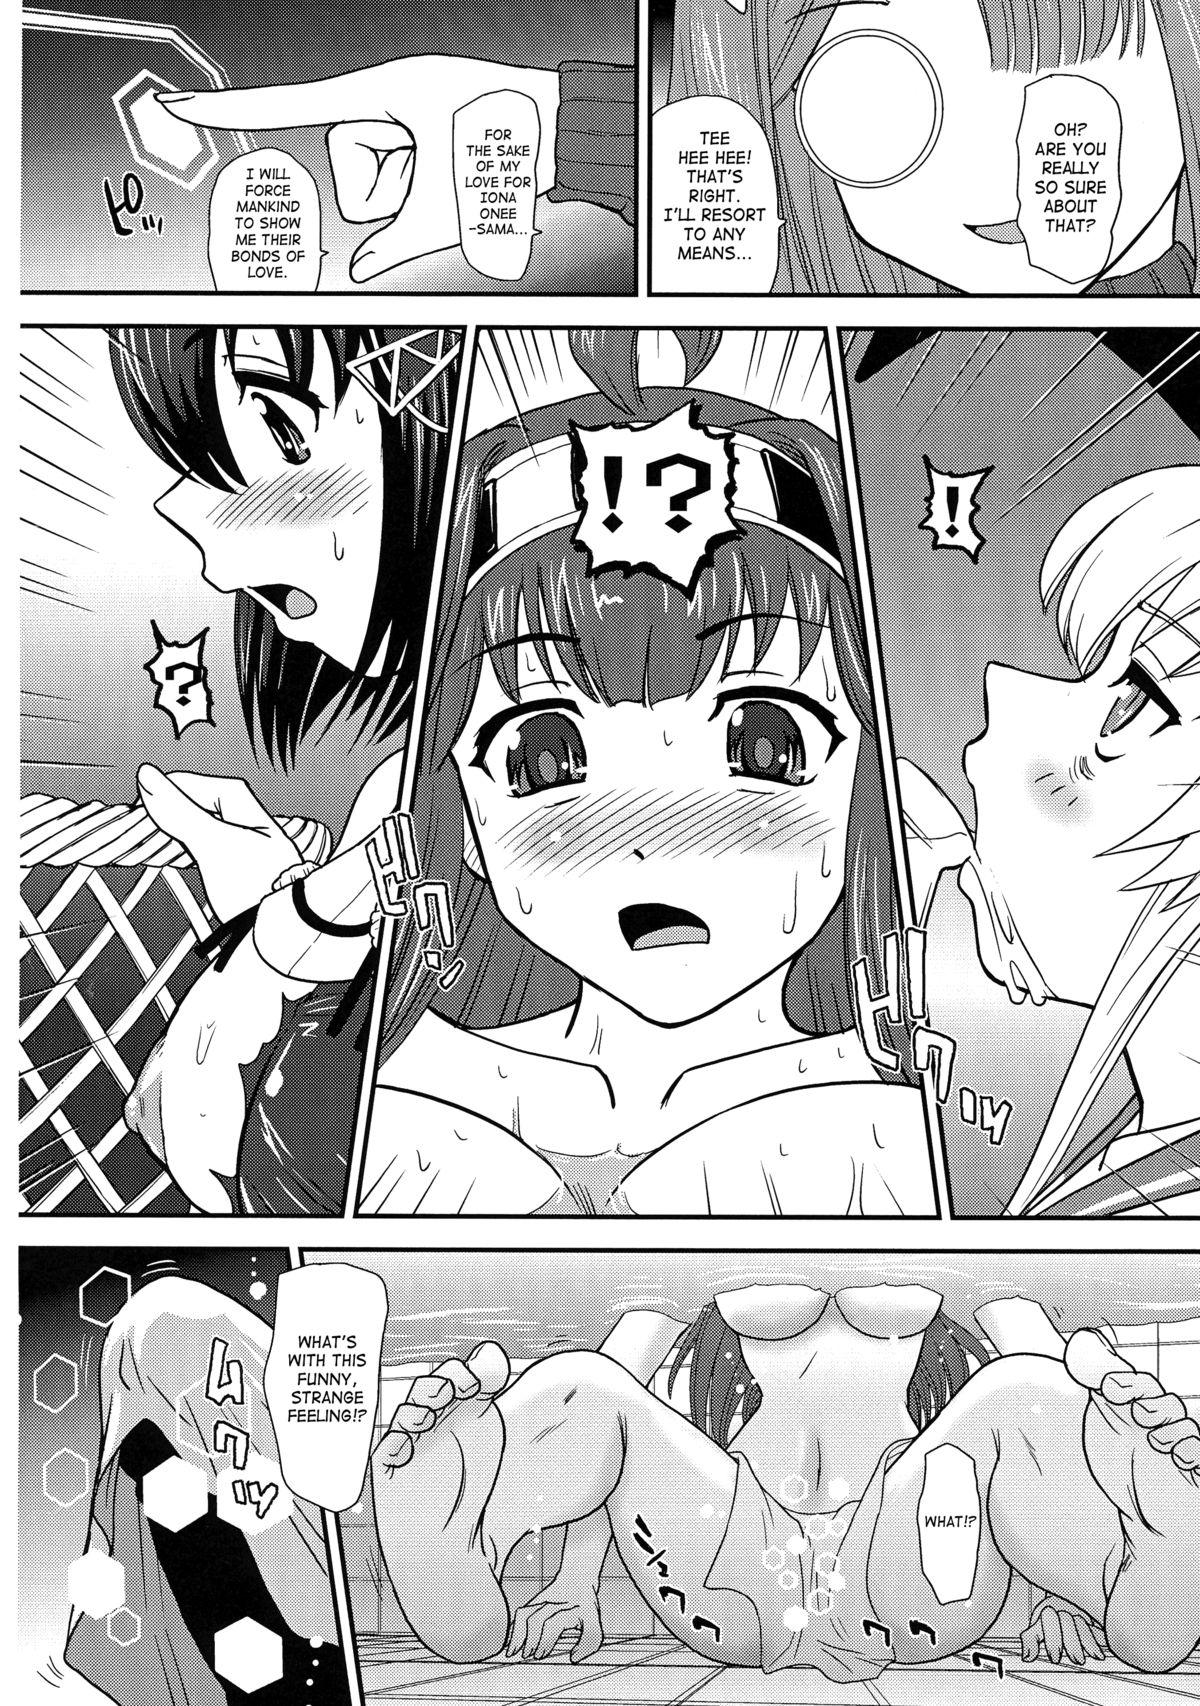 Rough Chinshufu!! - Kantai collection Arpeggio of blue steel Family Roleplay - Page 6